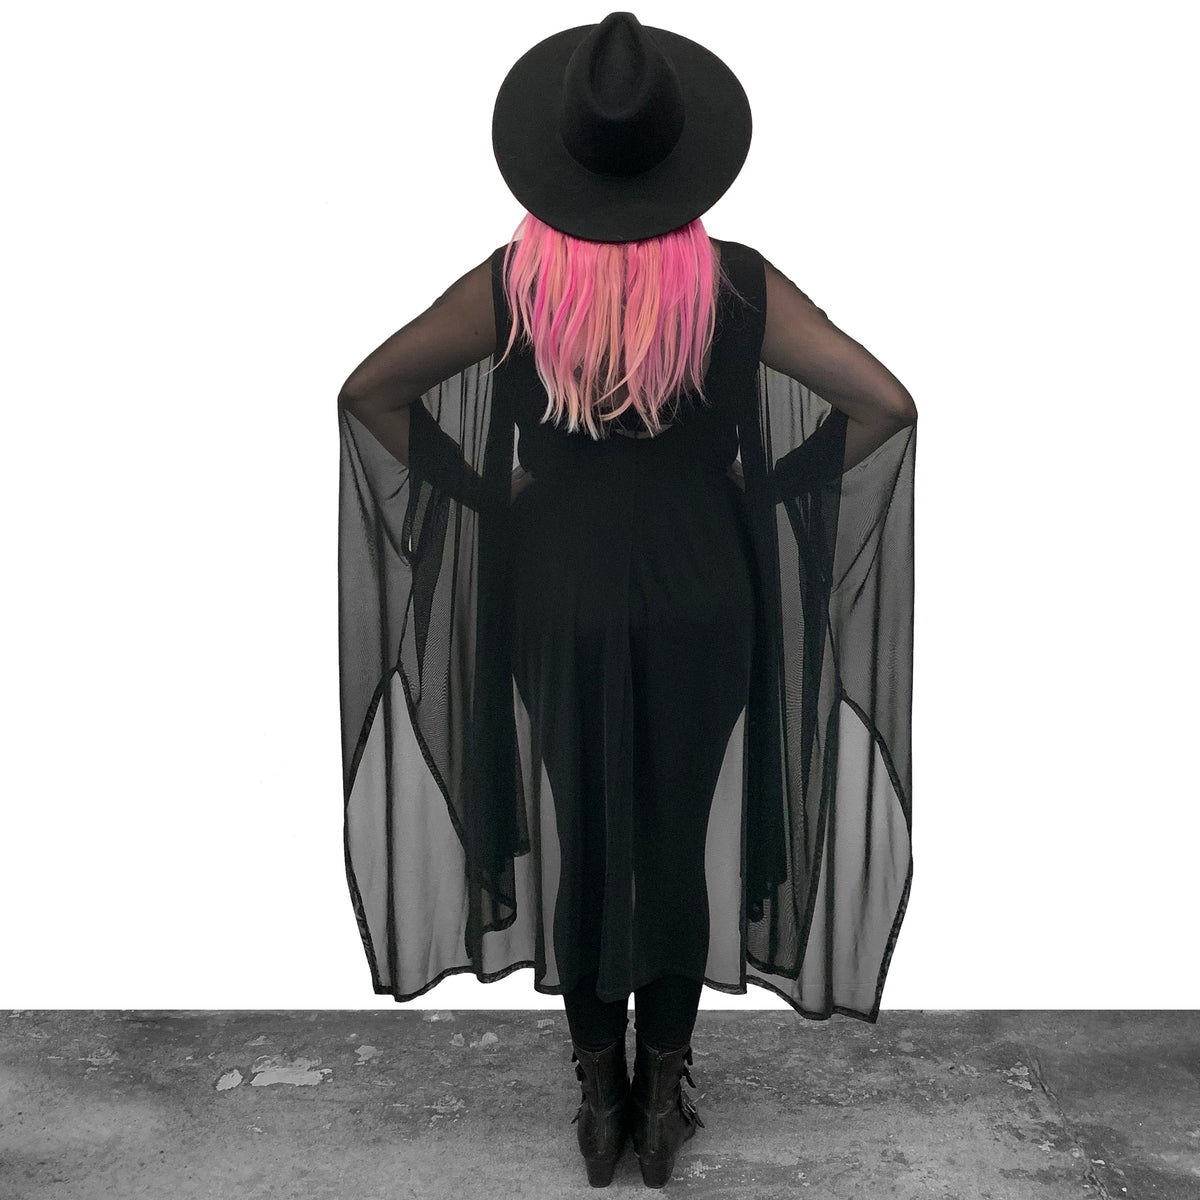 Lilith Mesh Oversized Cloak - Restocking soon! Sign up for notifications